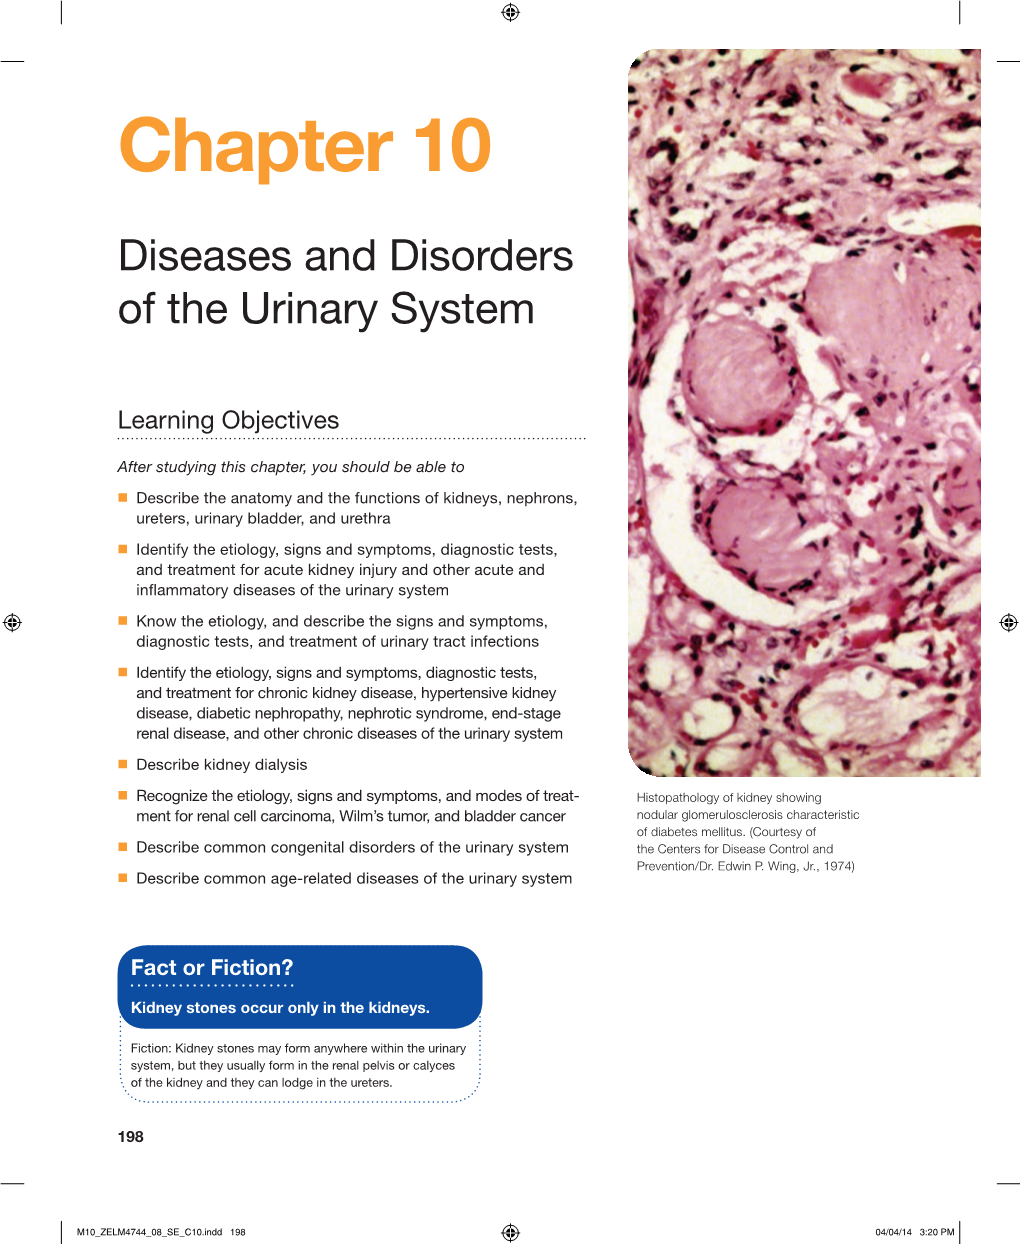 Diseases and Disorders of the Urinary System